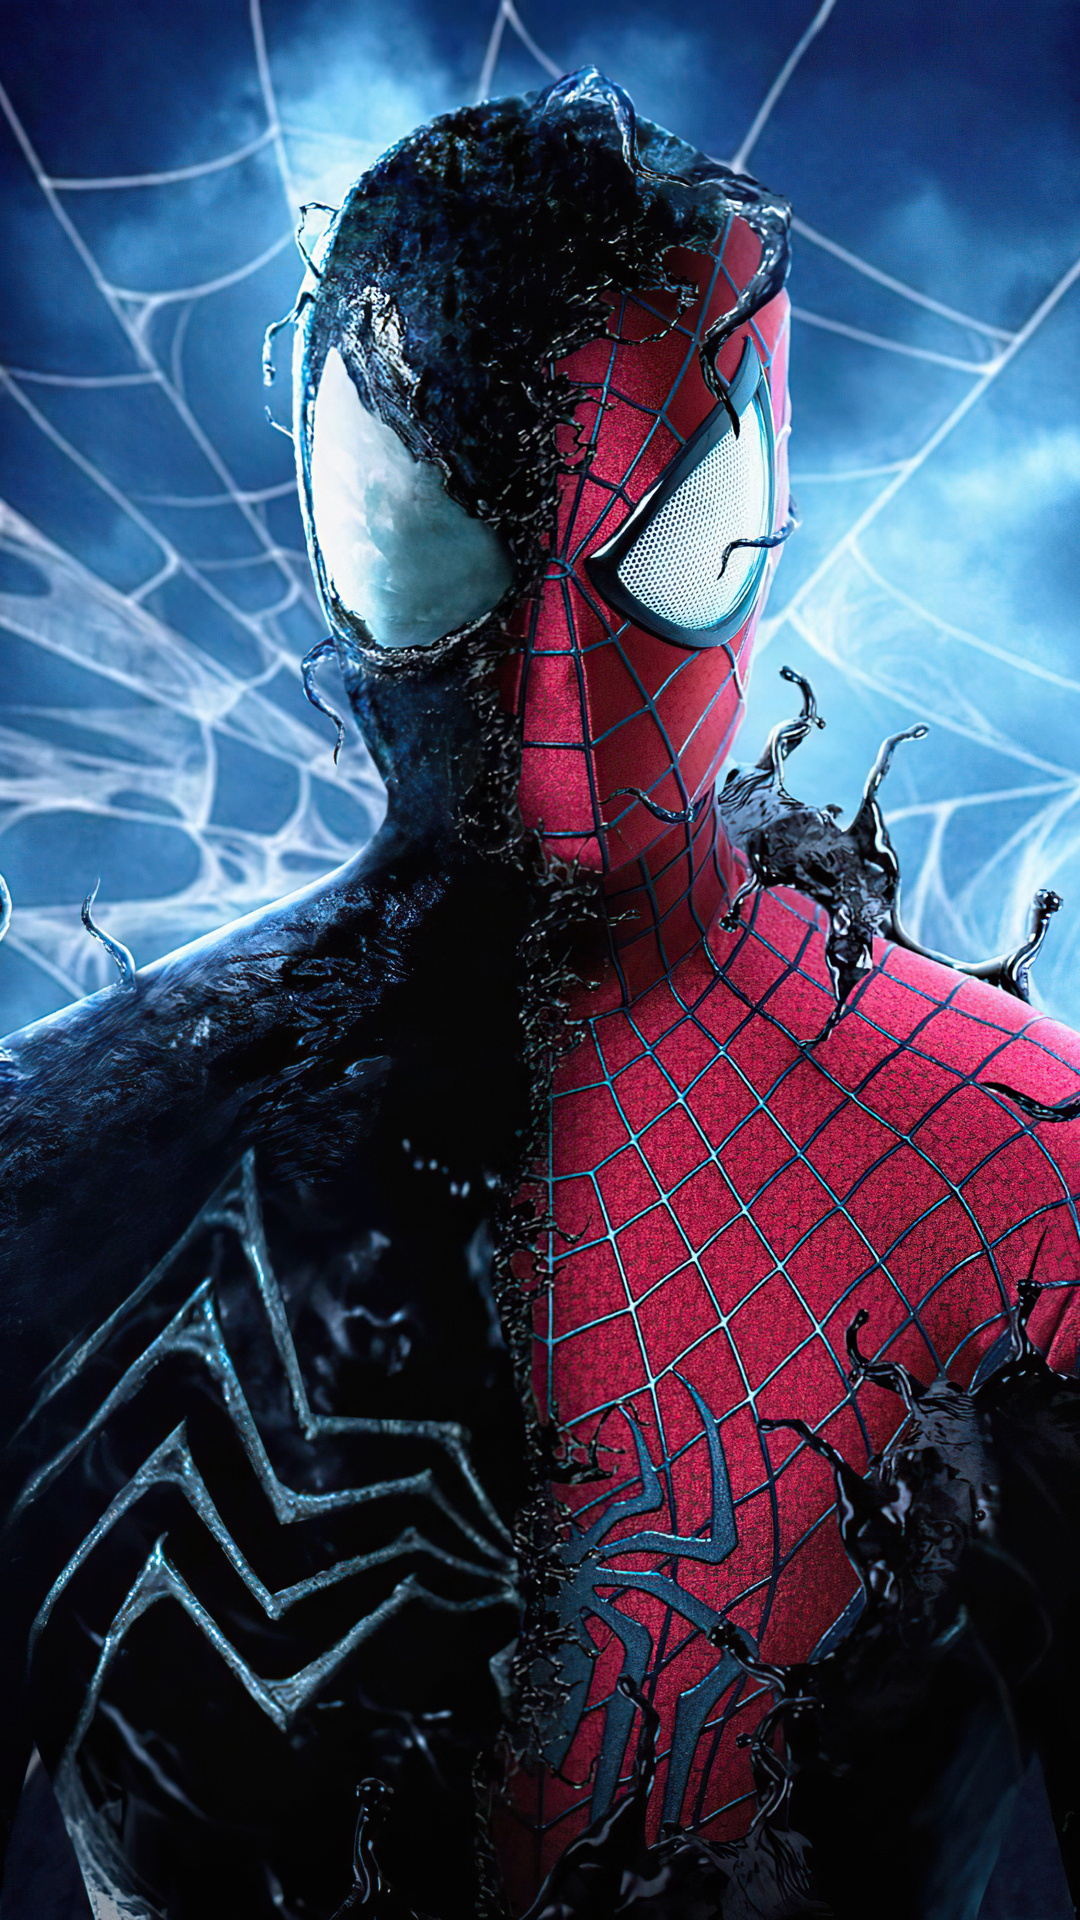 Spider-Man with the symbiote, 4K iPhone 7, HD wallpapers images, 1080x1920 Full HD Handy